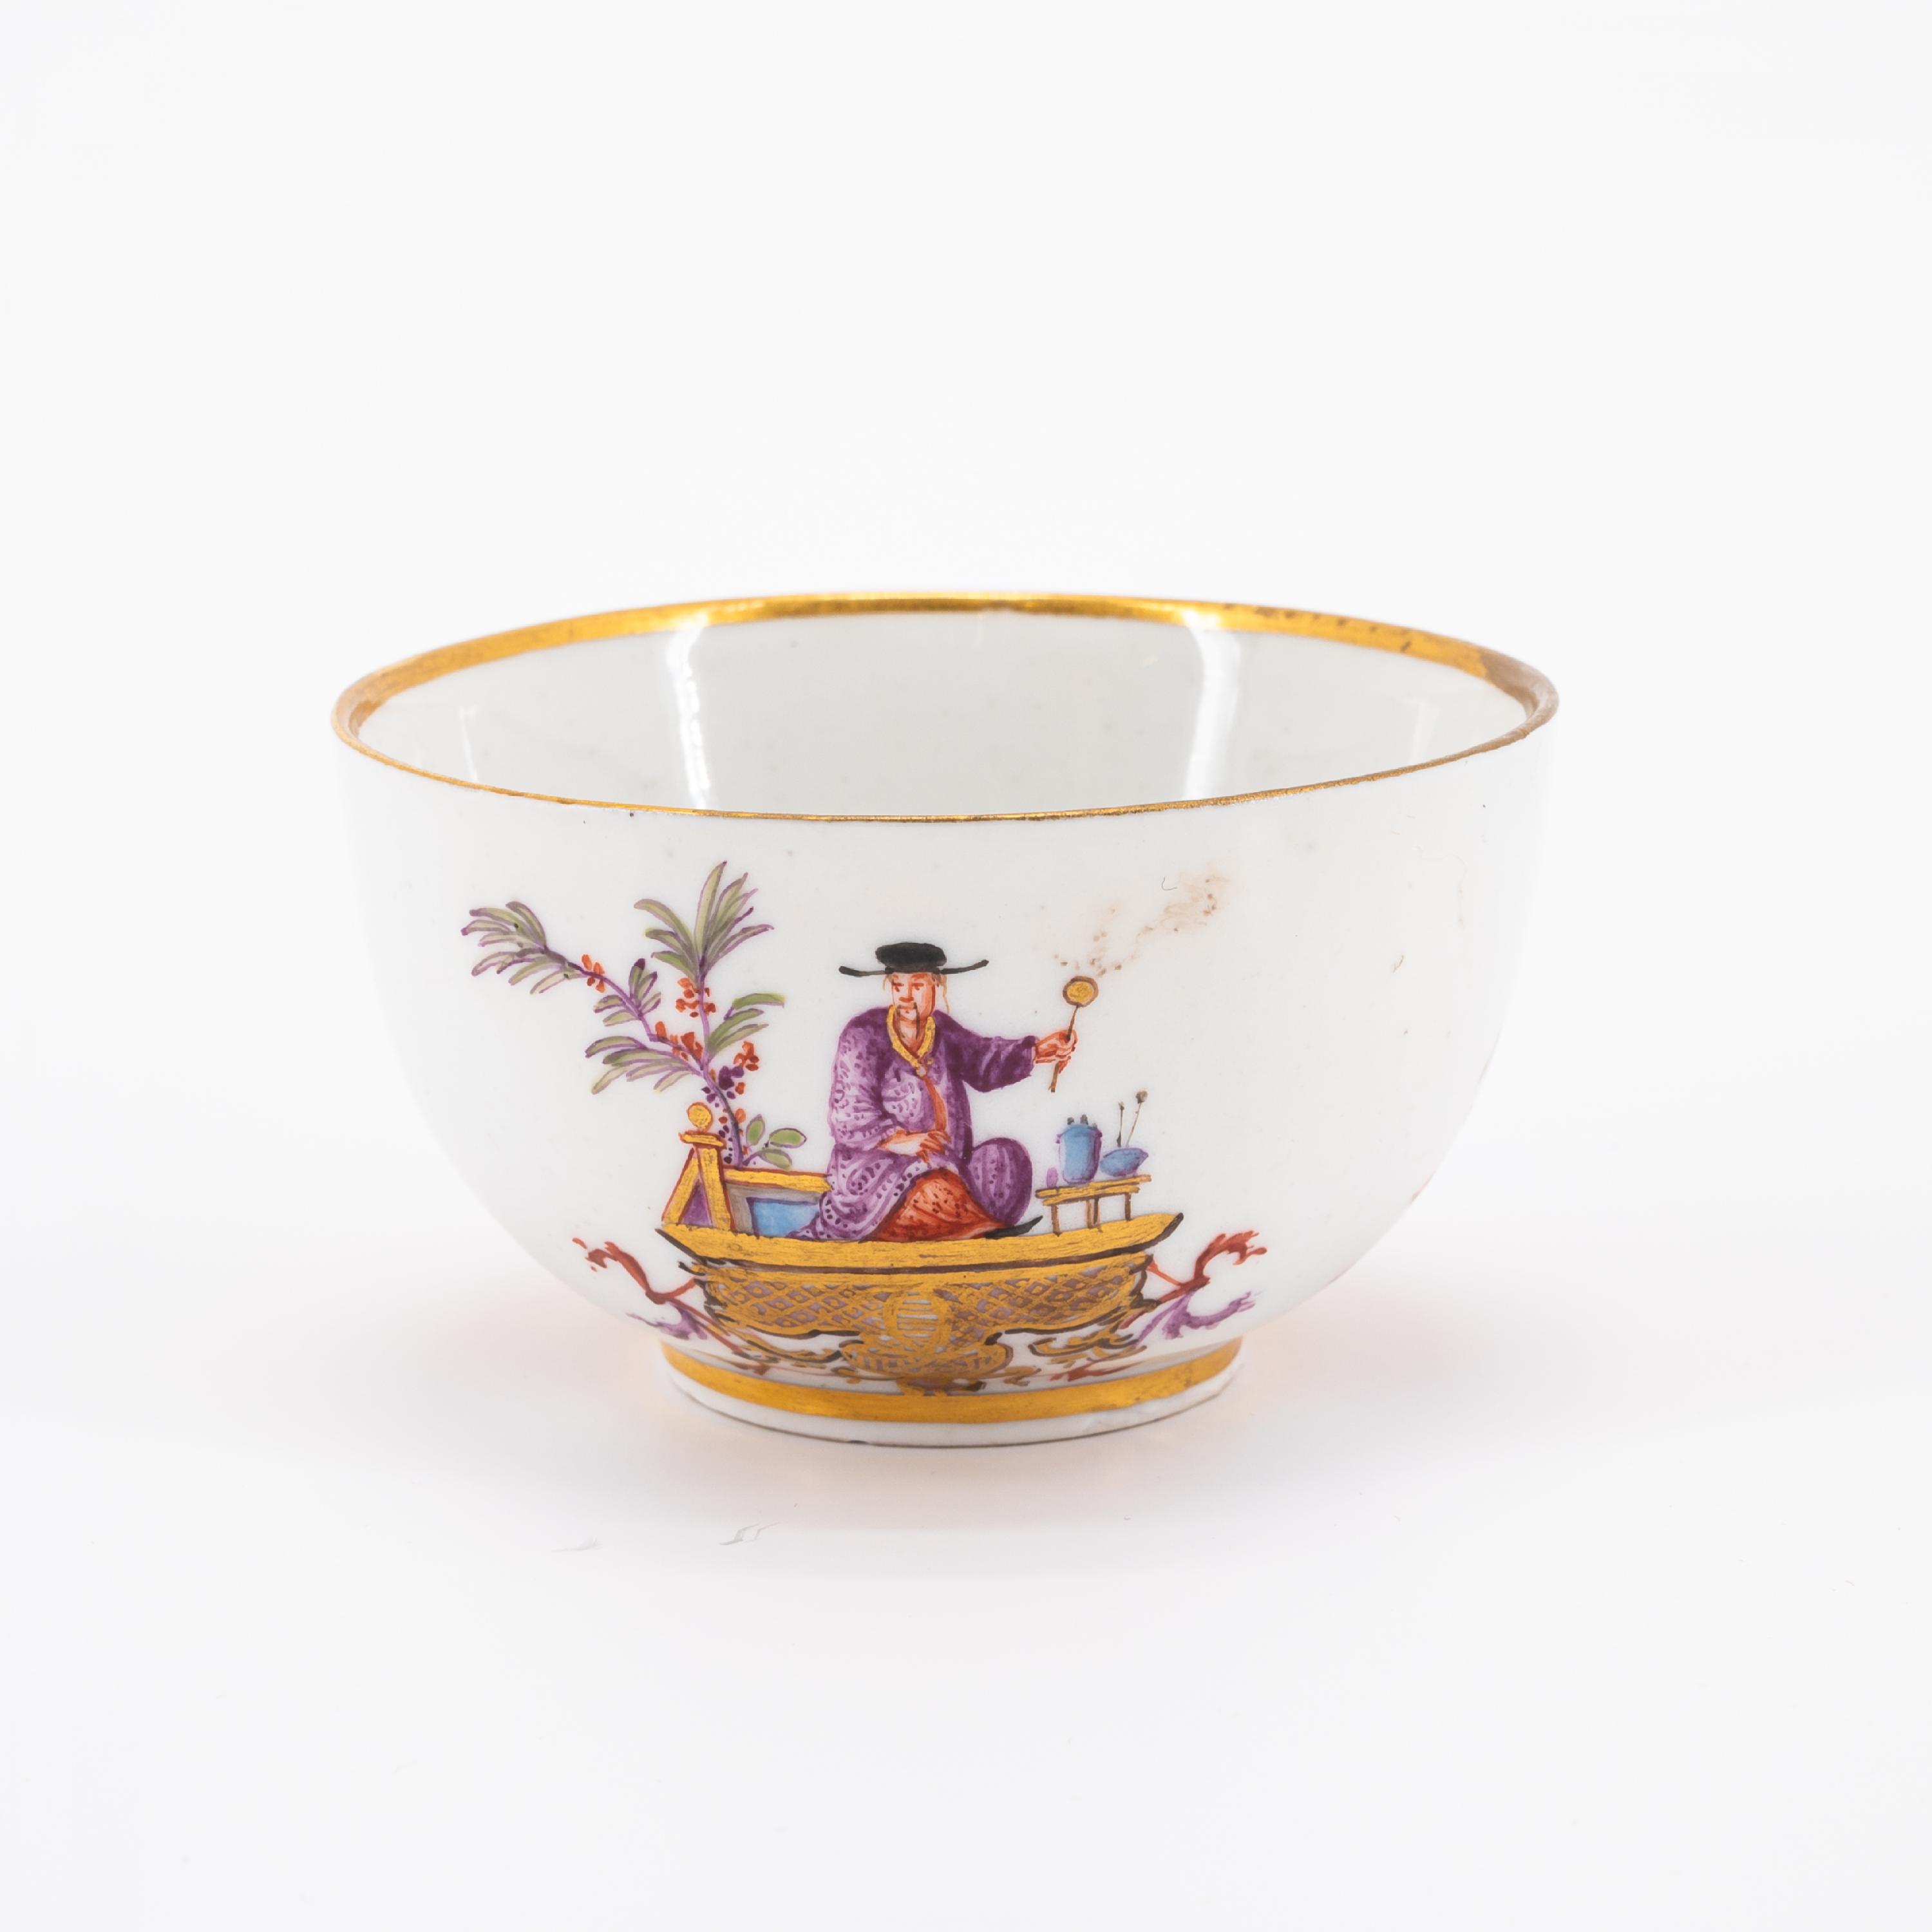 PORCELAIN TEA BOWL WITH CHINOISERIES - Image 3 of 5